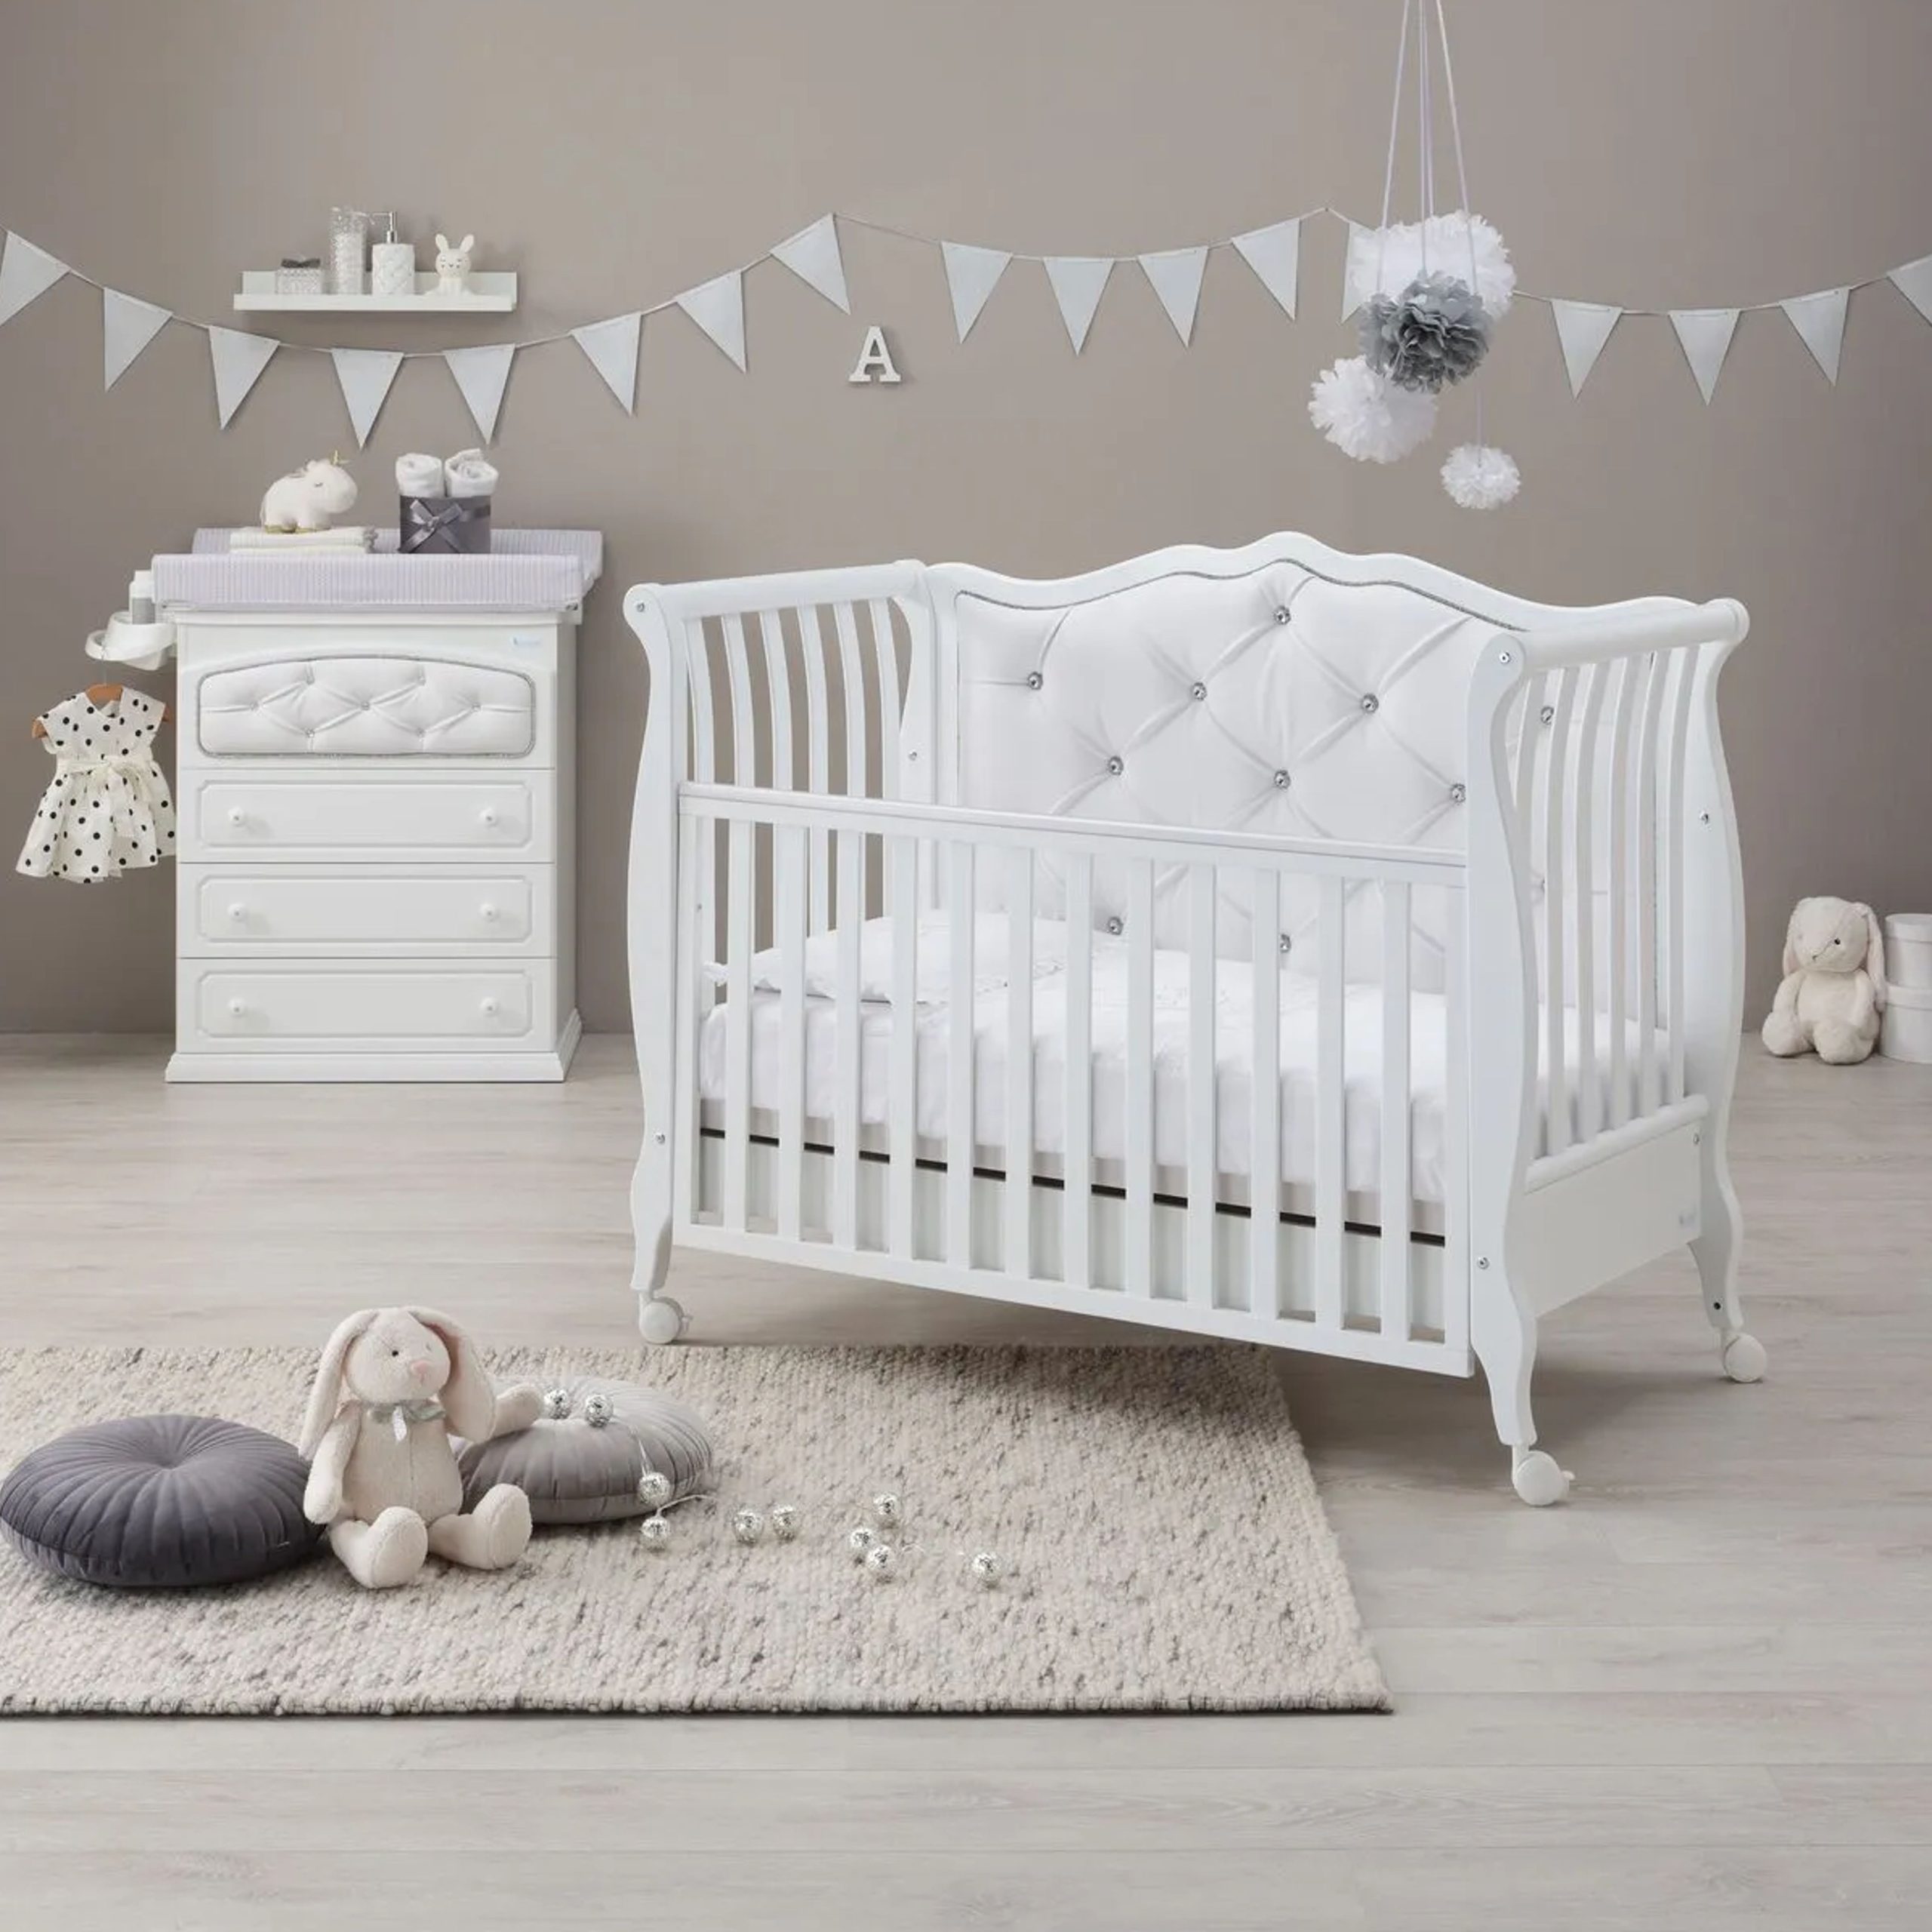 Azzurra Design Bagnetto Imperial Bianco - Baby House Shop